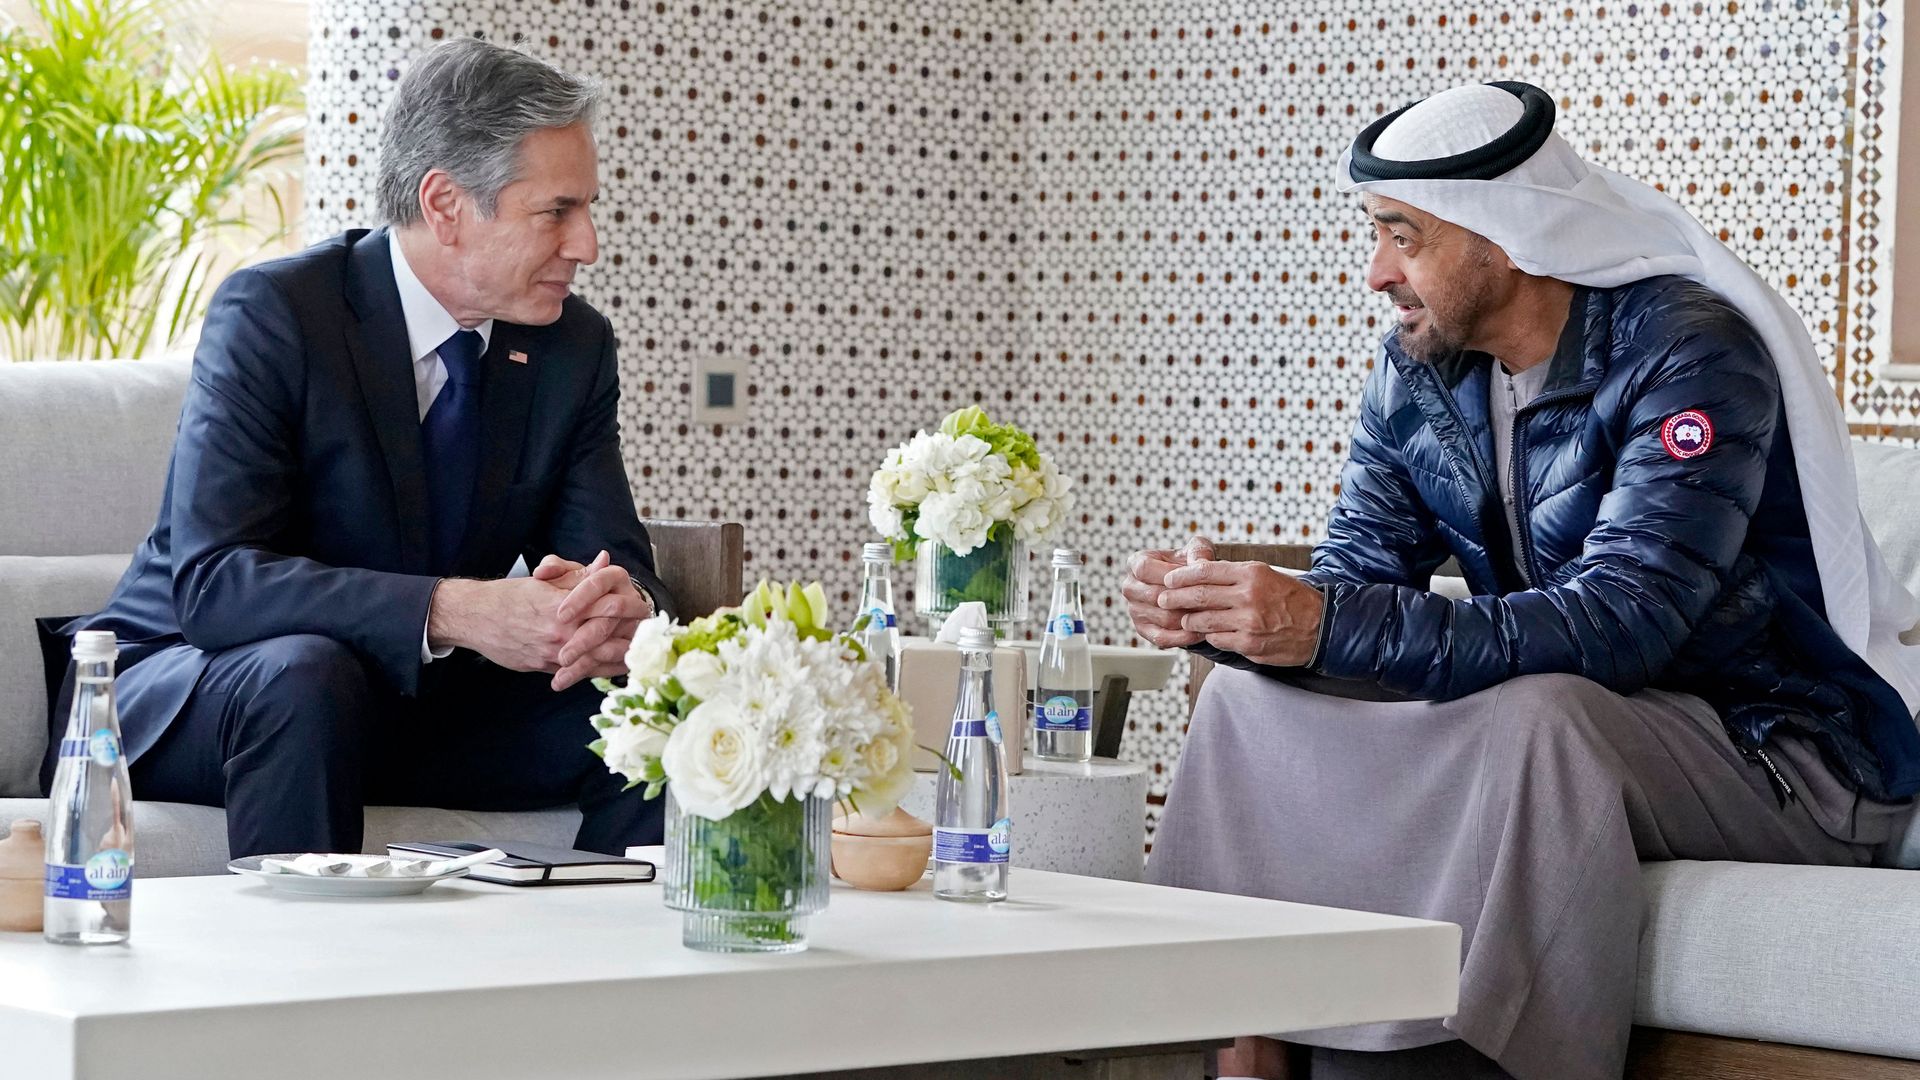 US Secretary of State Antony Blinken meets with Abu Dhabis Crown Prince Mohammed bin Zayed al-Nahyan, at his residence in Rabat, Morocco. 